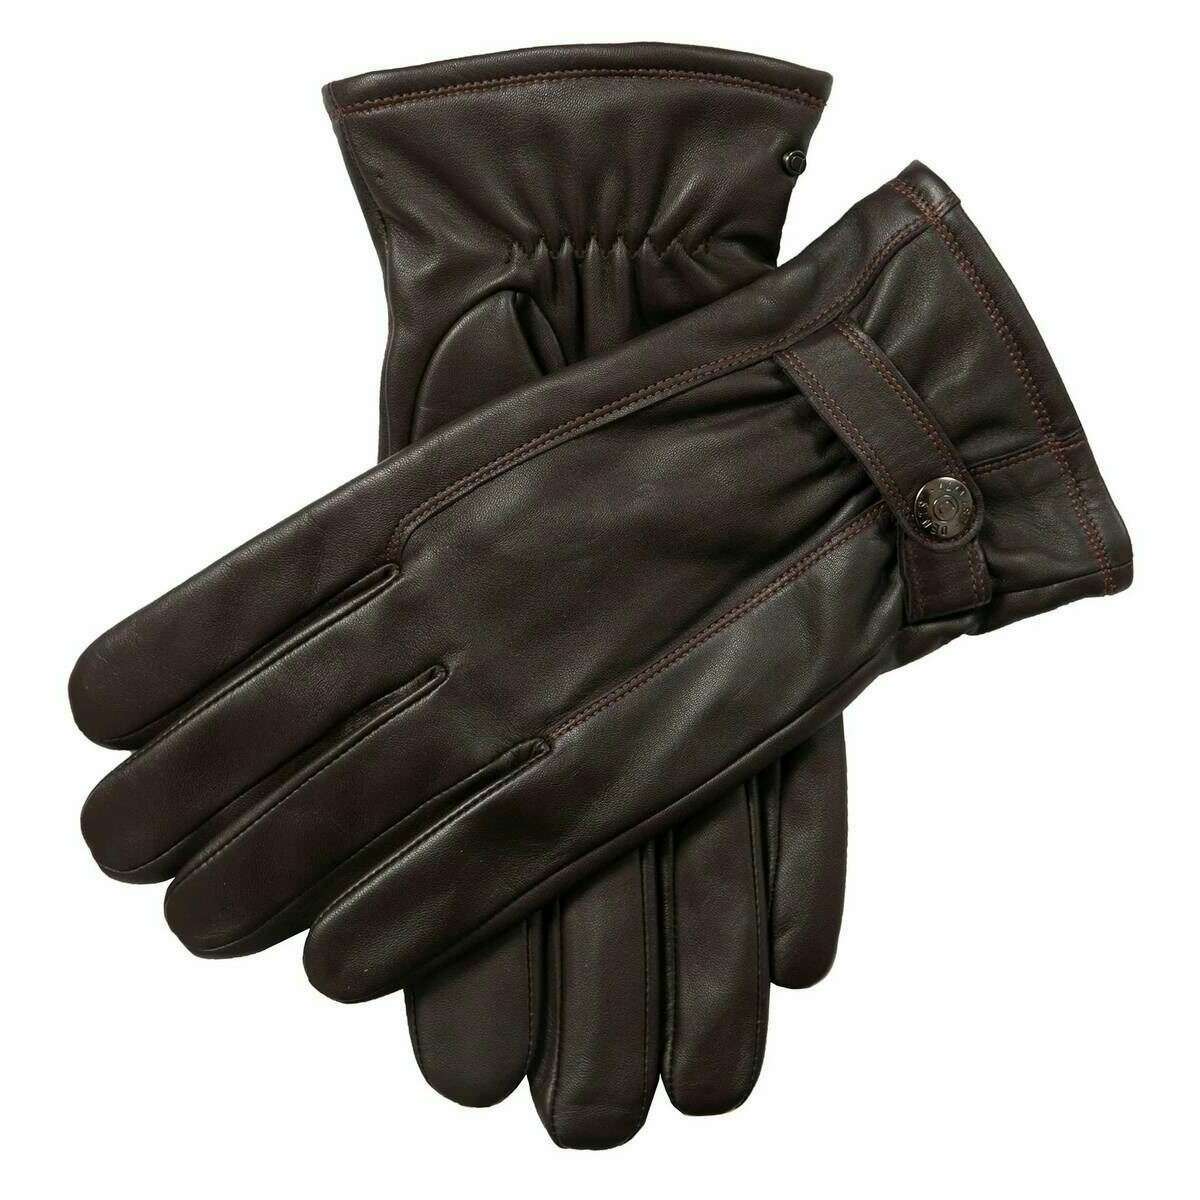 Dents Haworth Touchscreen Leather Gloves - Brown